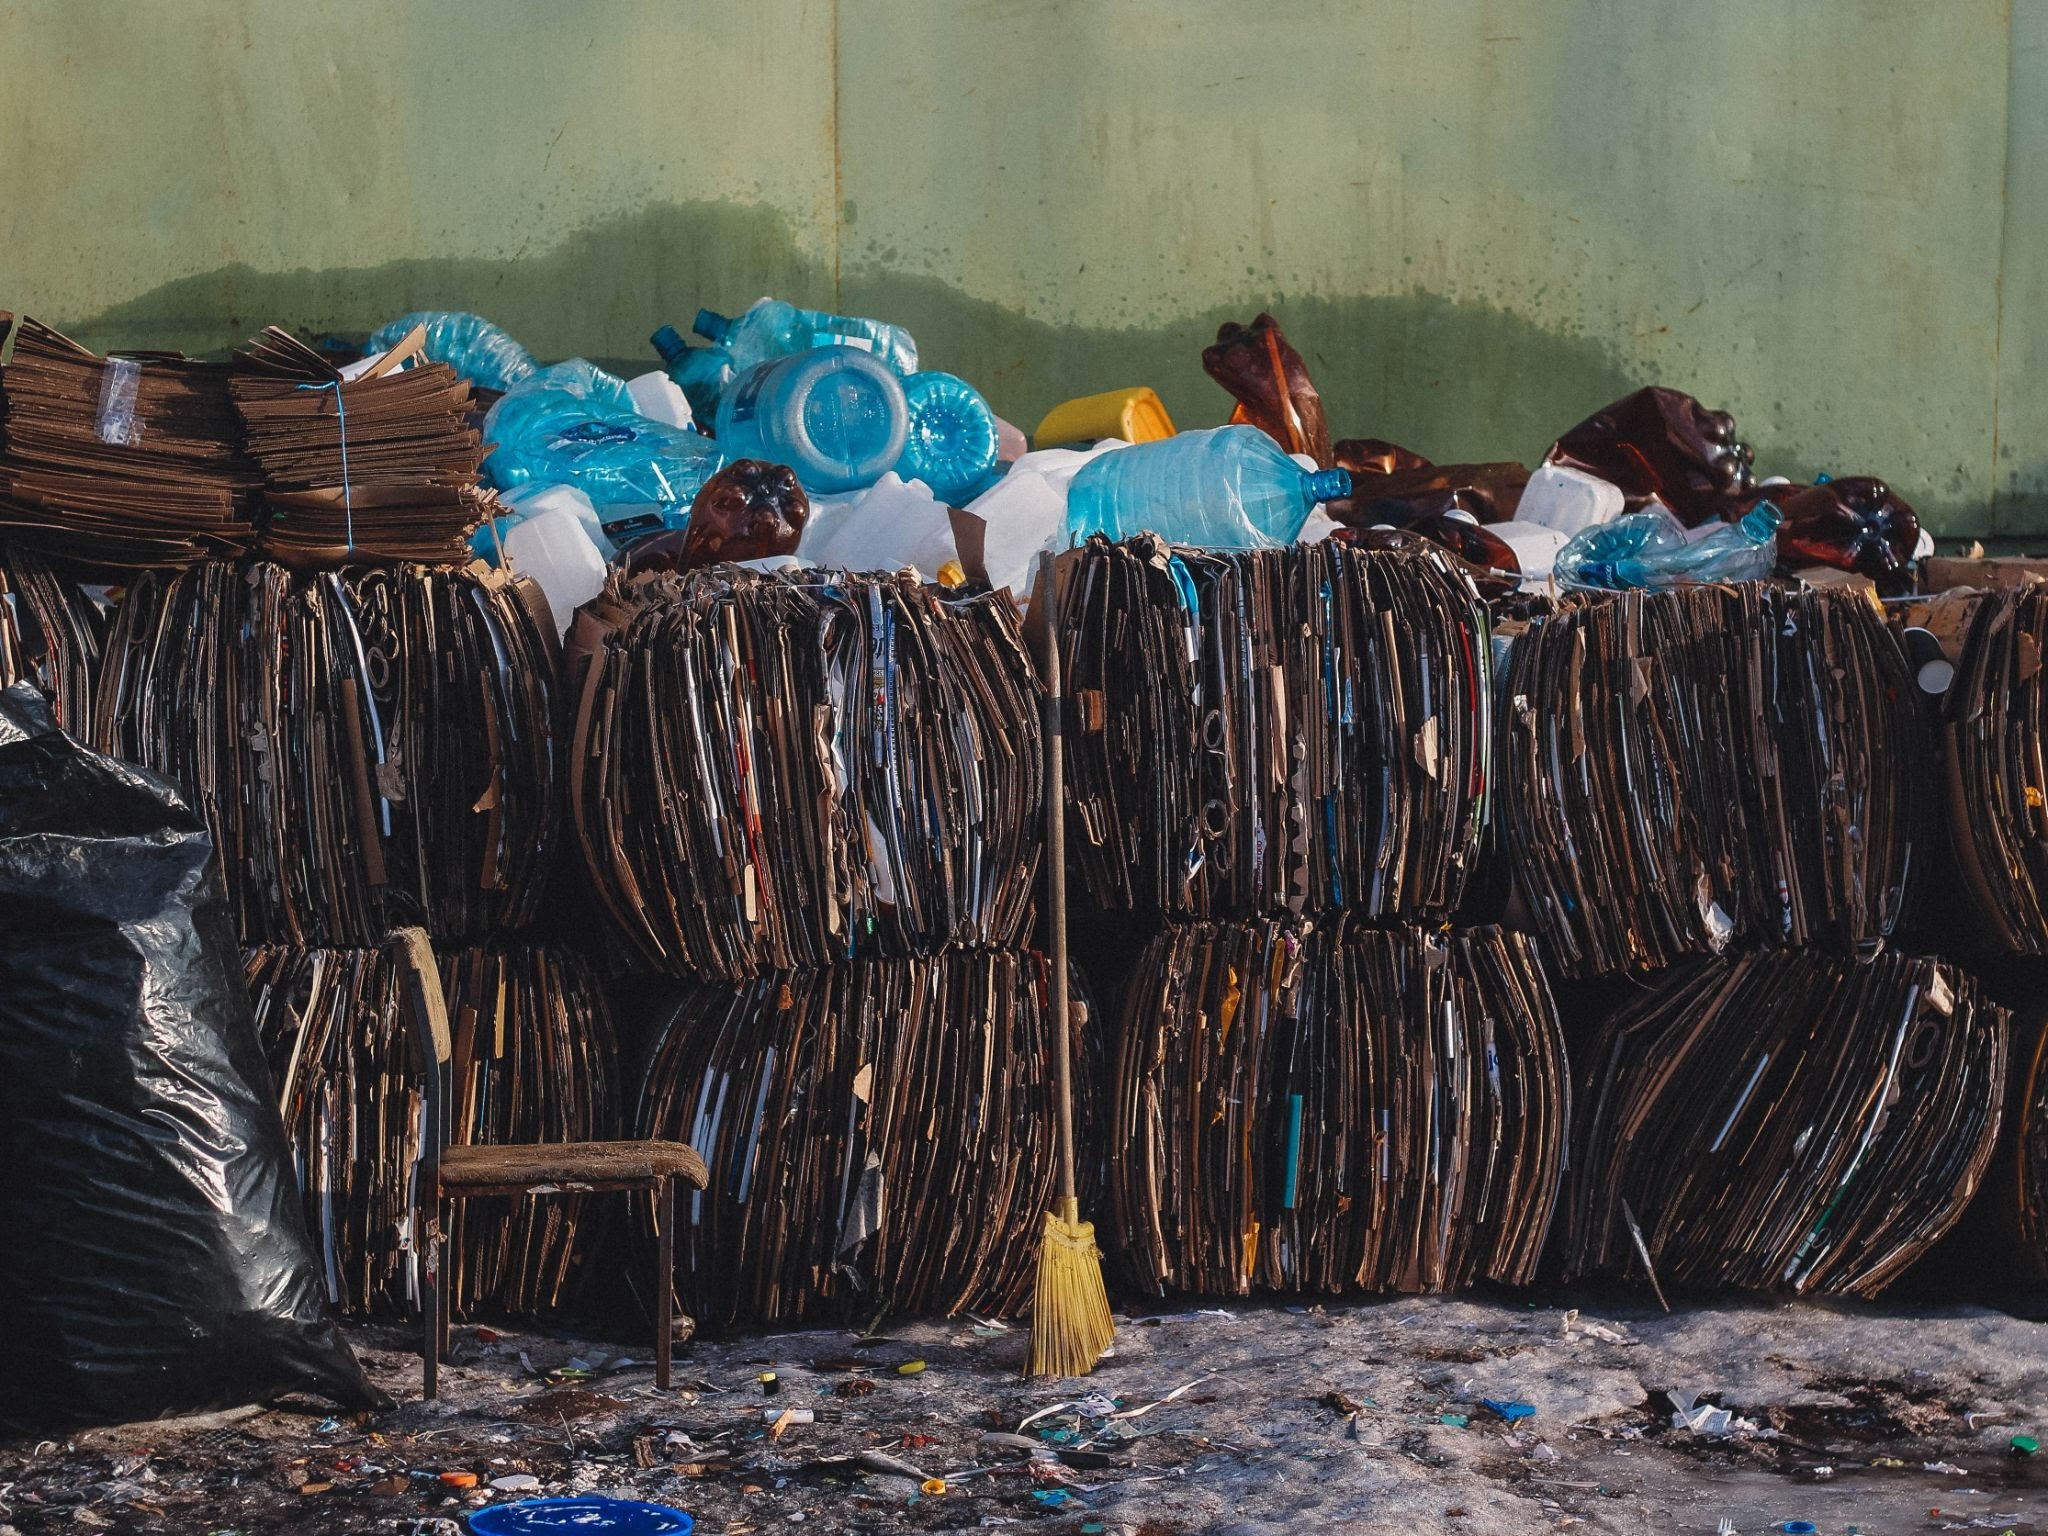 8 Things You Probably Didn’t Know About Landfills